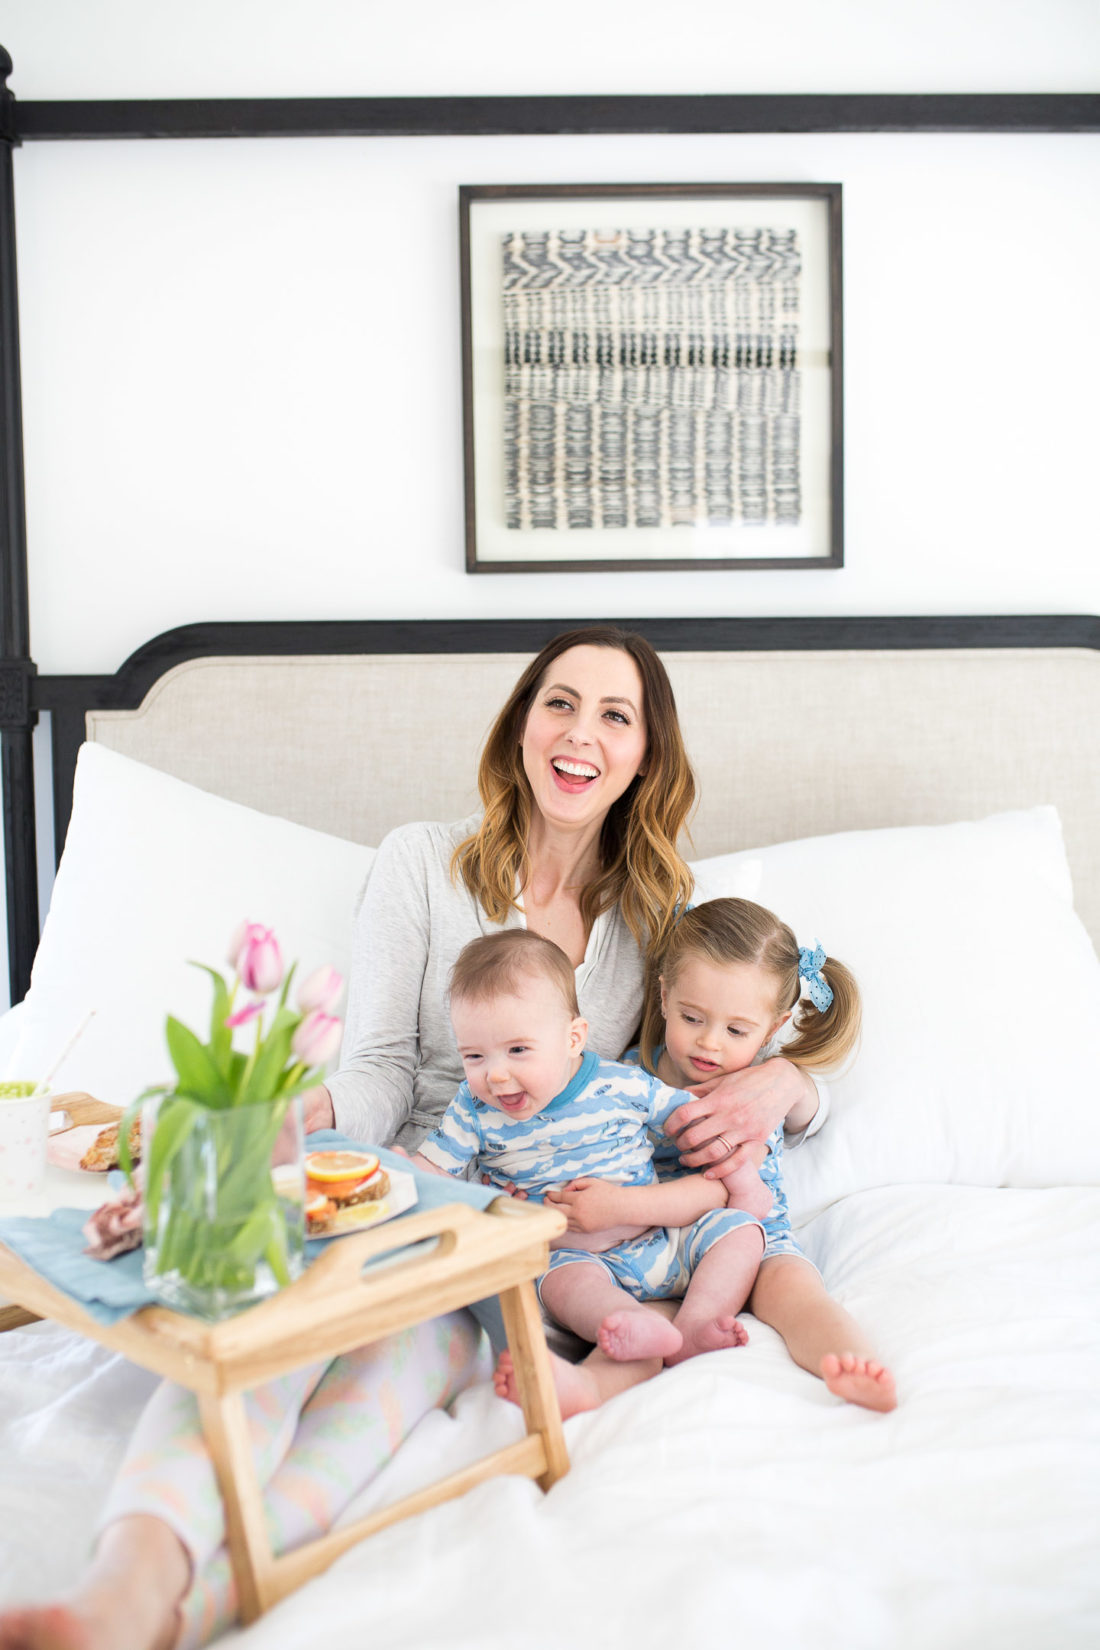 Eva Amurri Martino has both of her children on her lap for a Mother's Day breakfast in bed